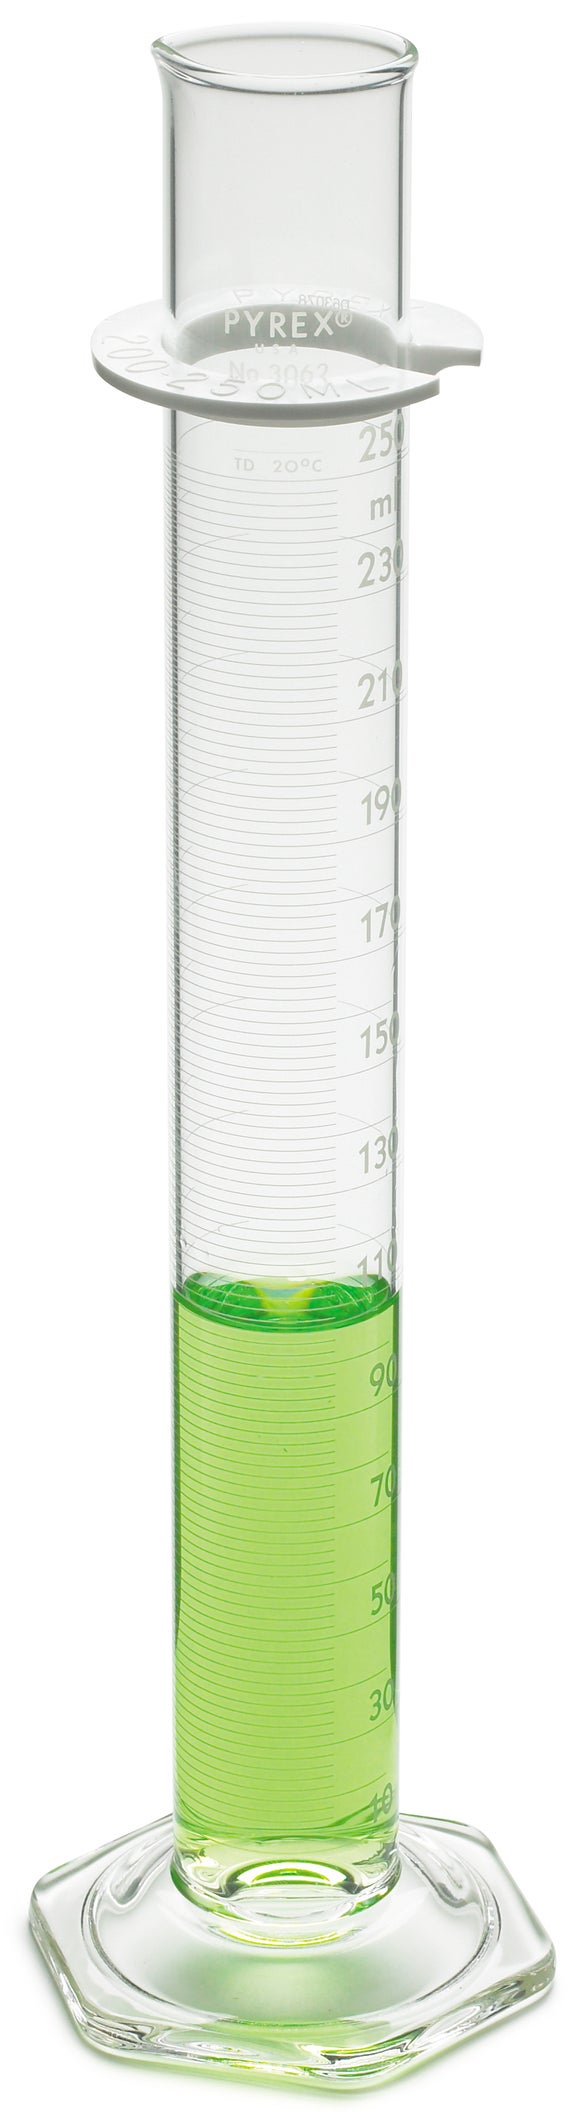 Cylinder, Graduated, 500 mL, Certified